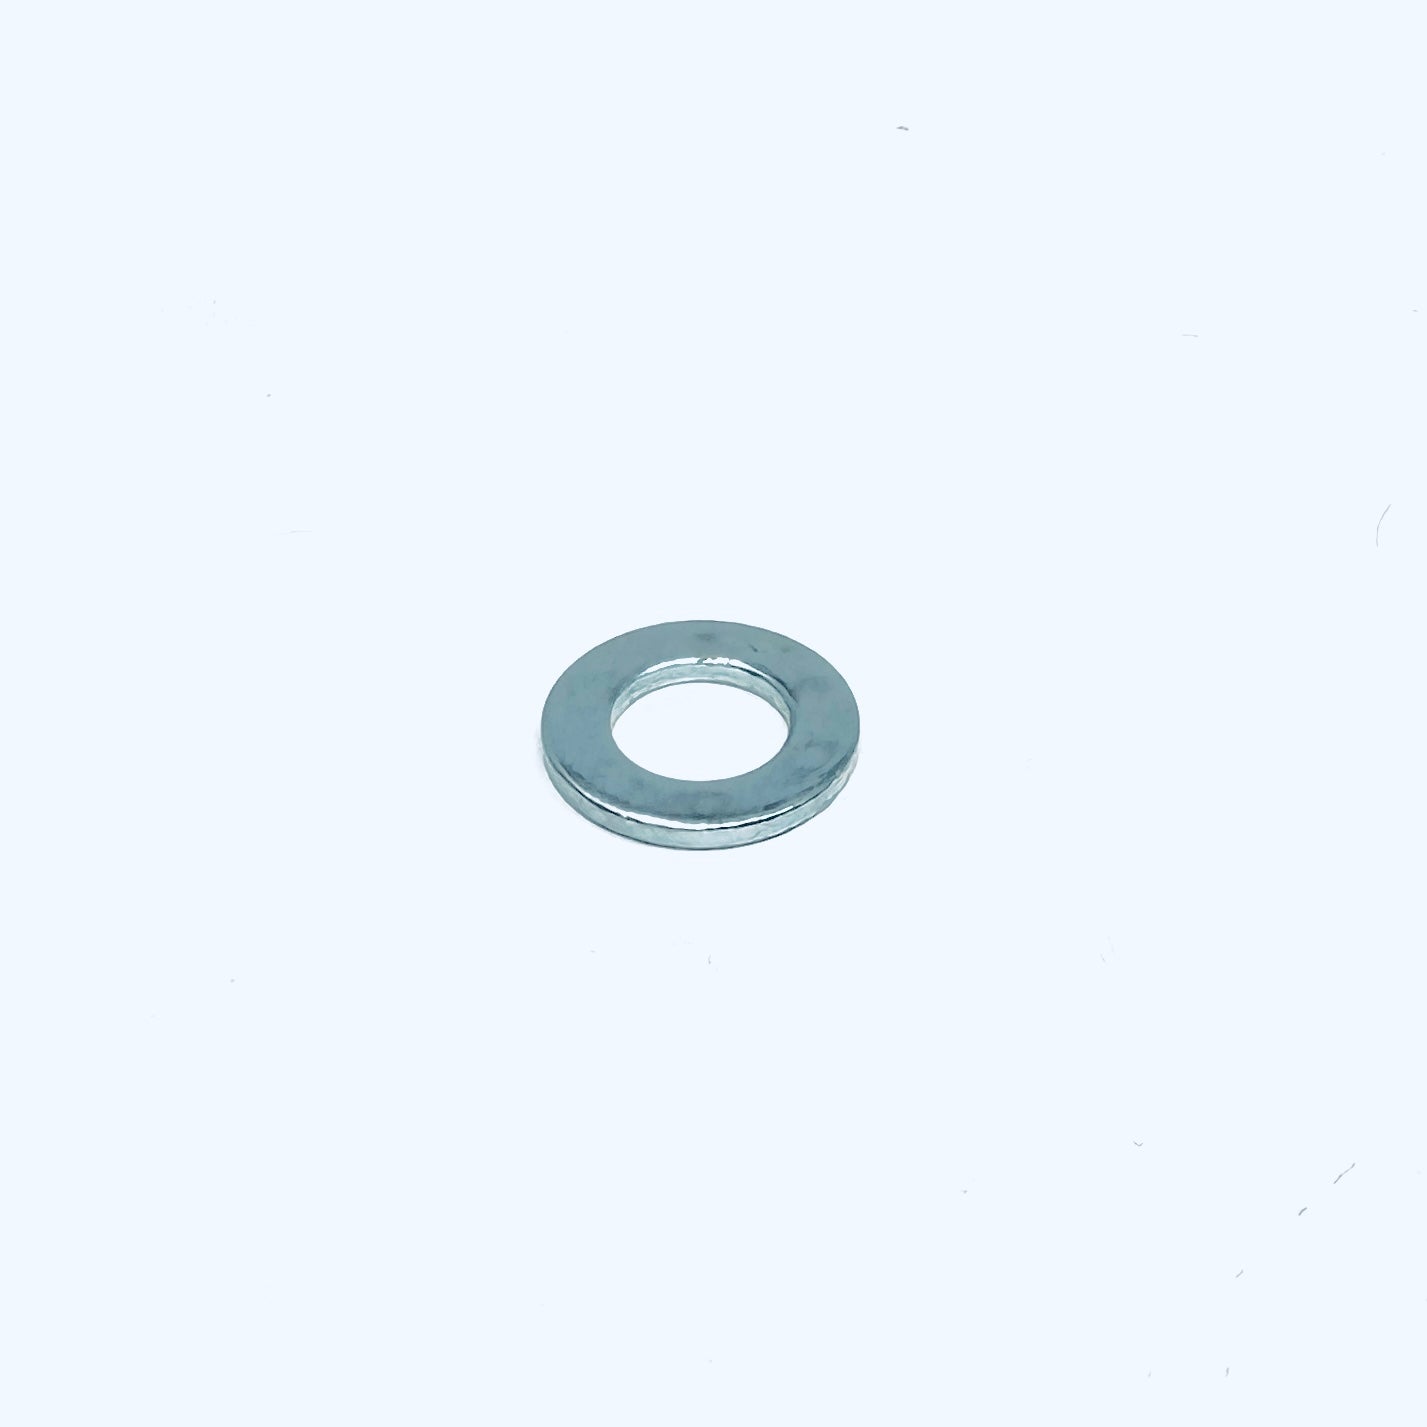 Authentic Fender Steel Washer .284x.502, authentic fender replacement parts, ruby parts